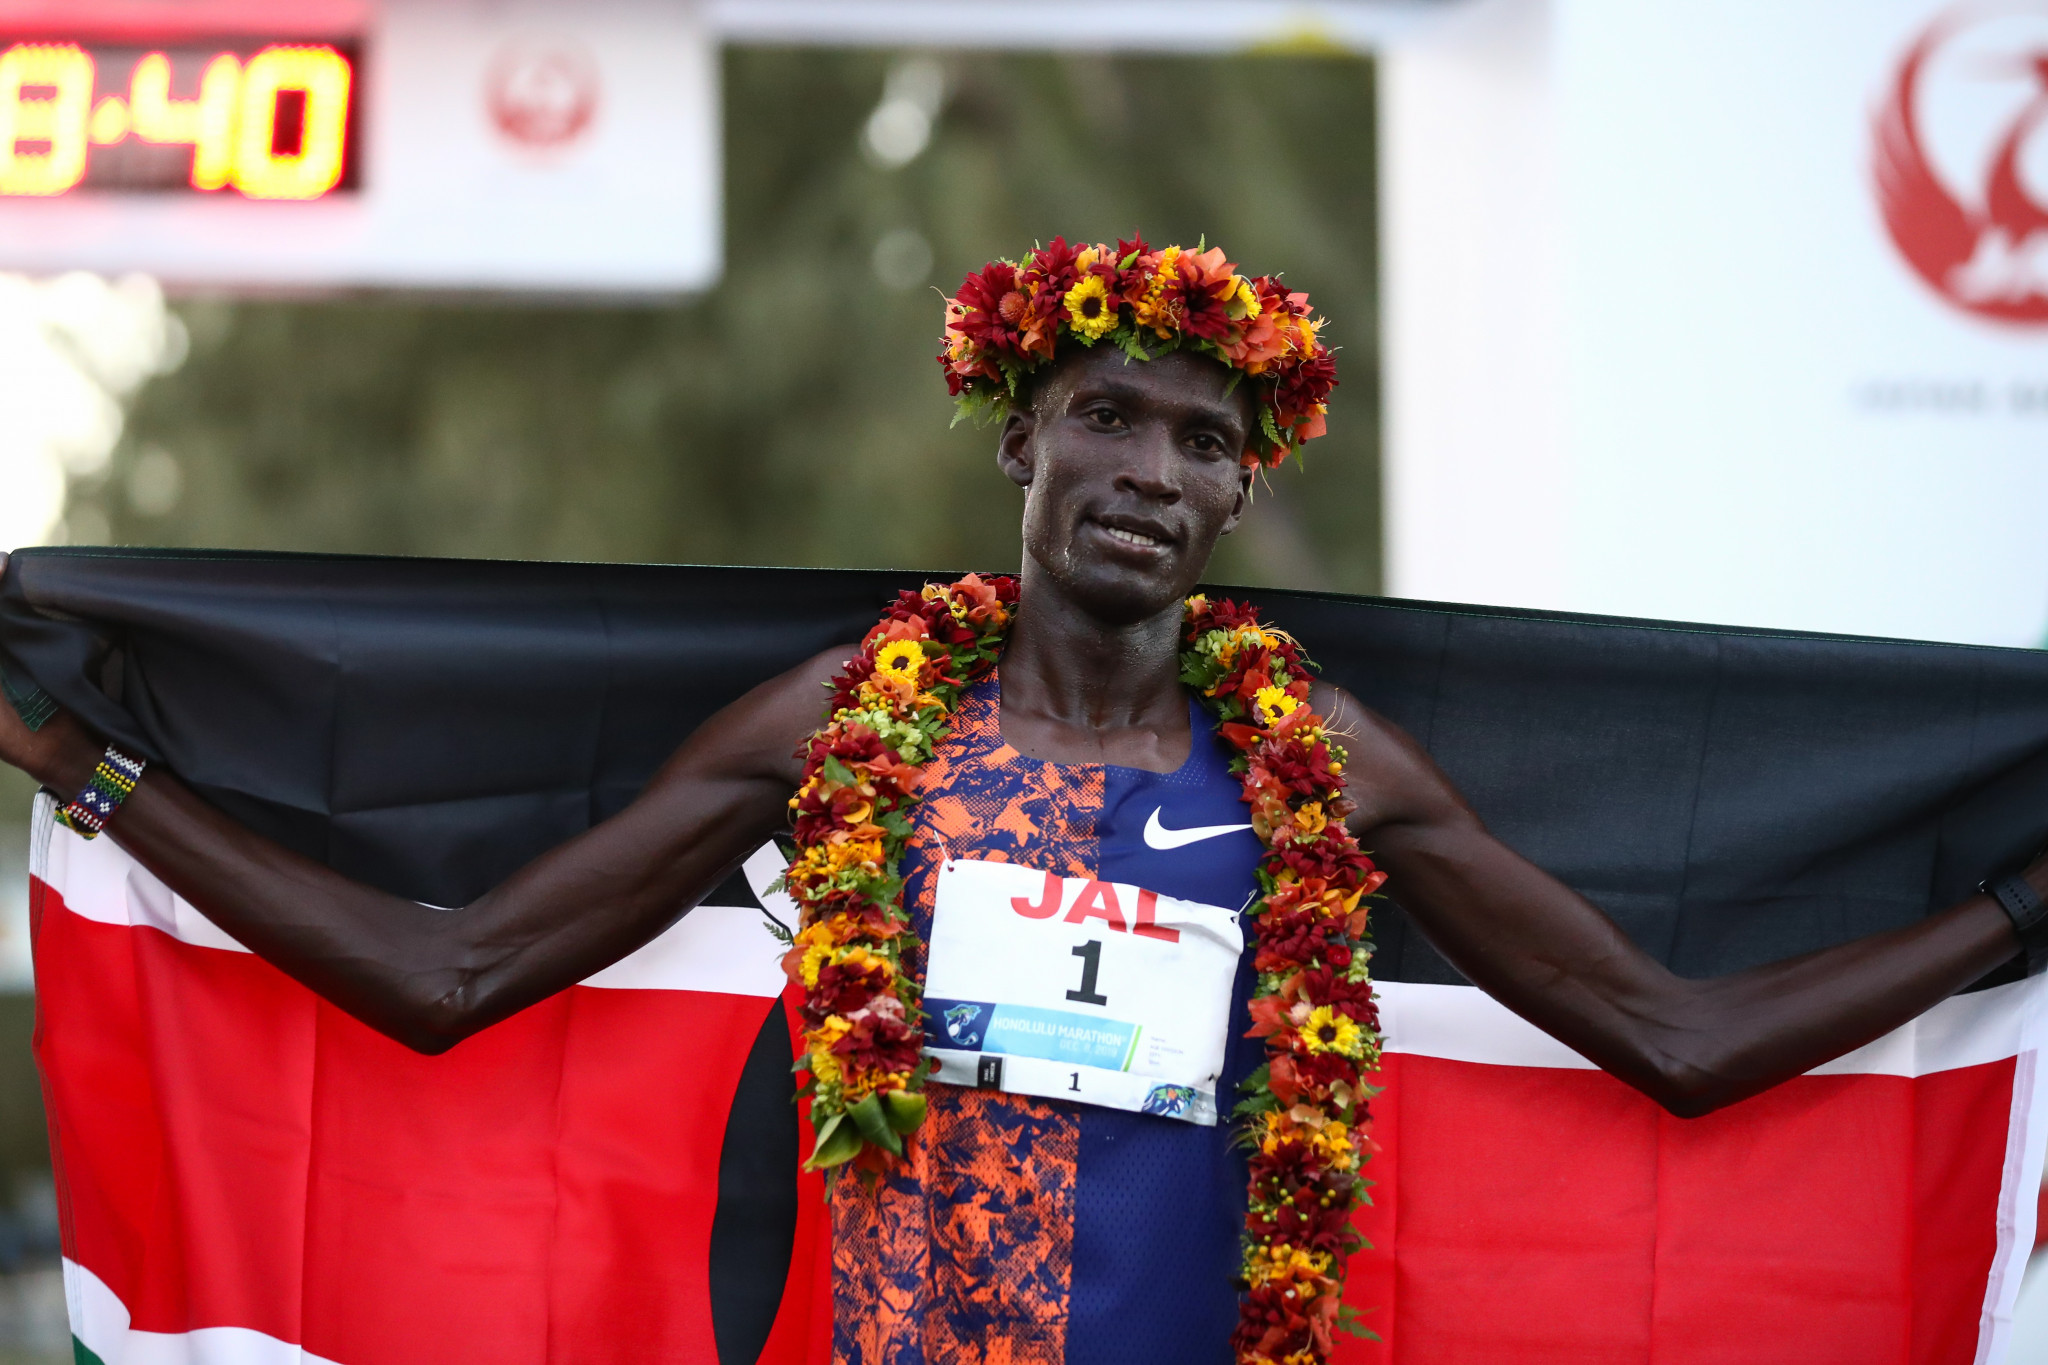 Ekiru banned for 10 years as sixth fastest marathon of all time scrubbed from records